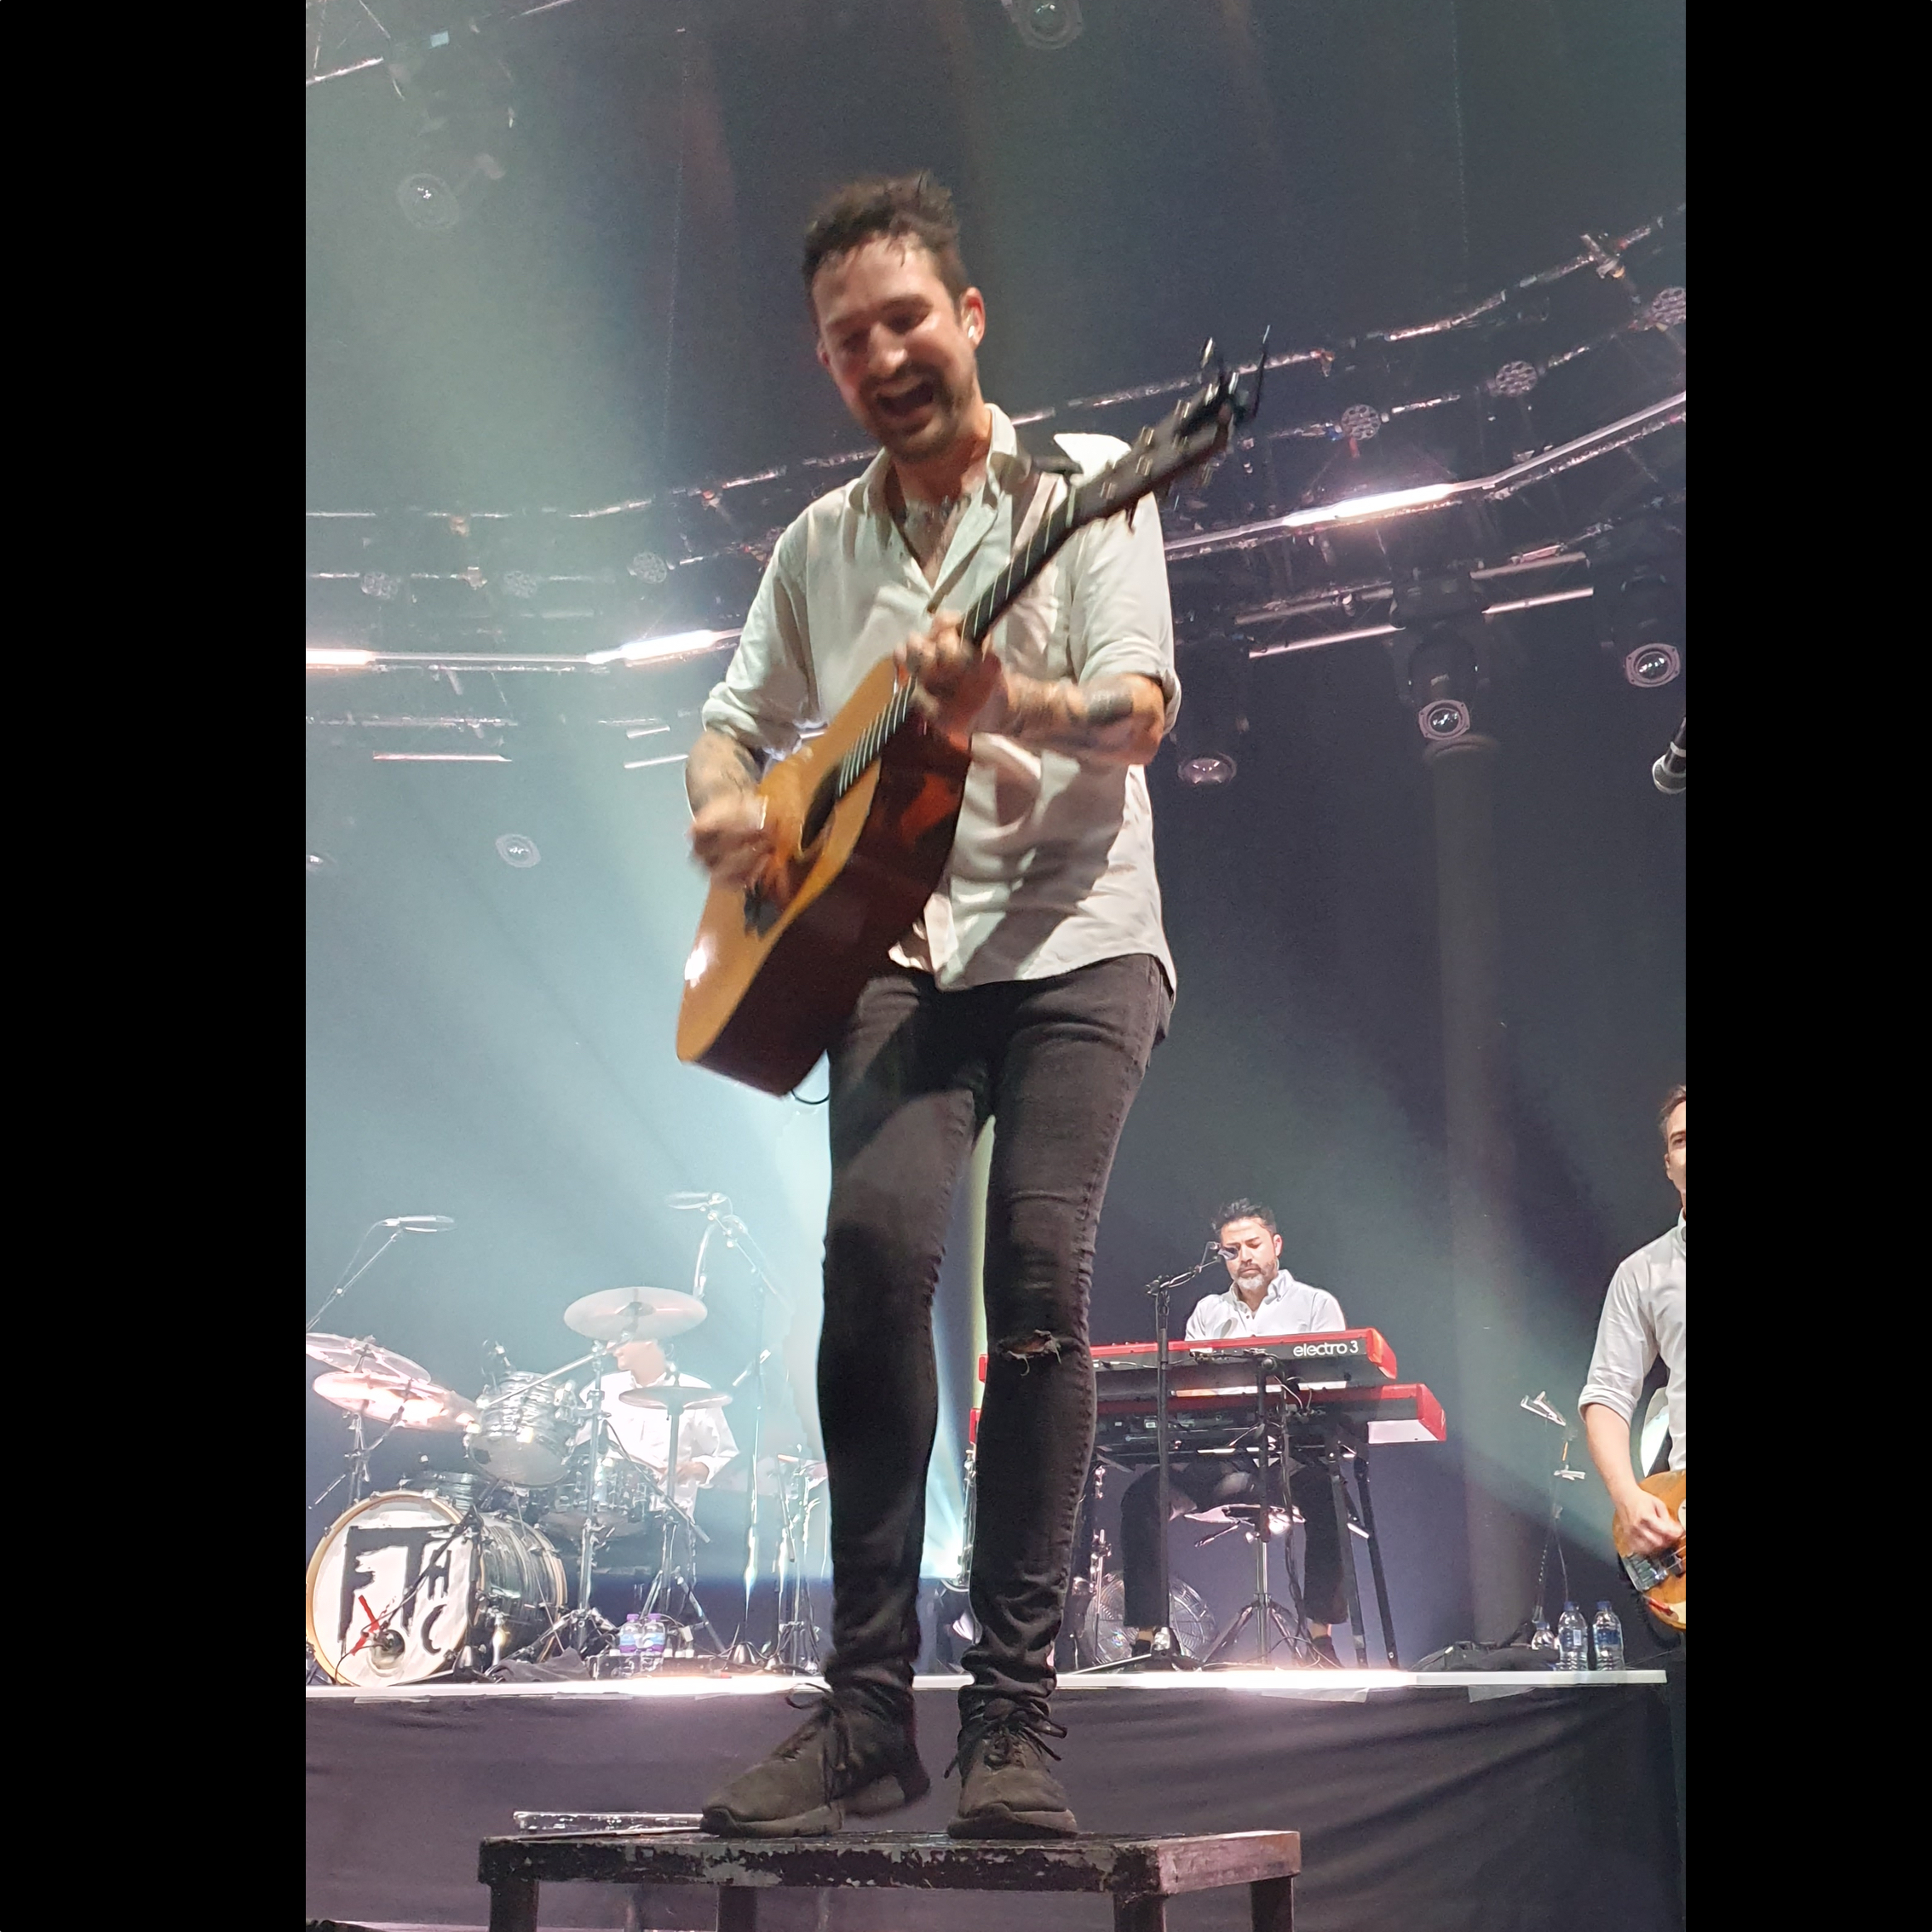 Frank Turner totally chuffed he did a solo right